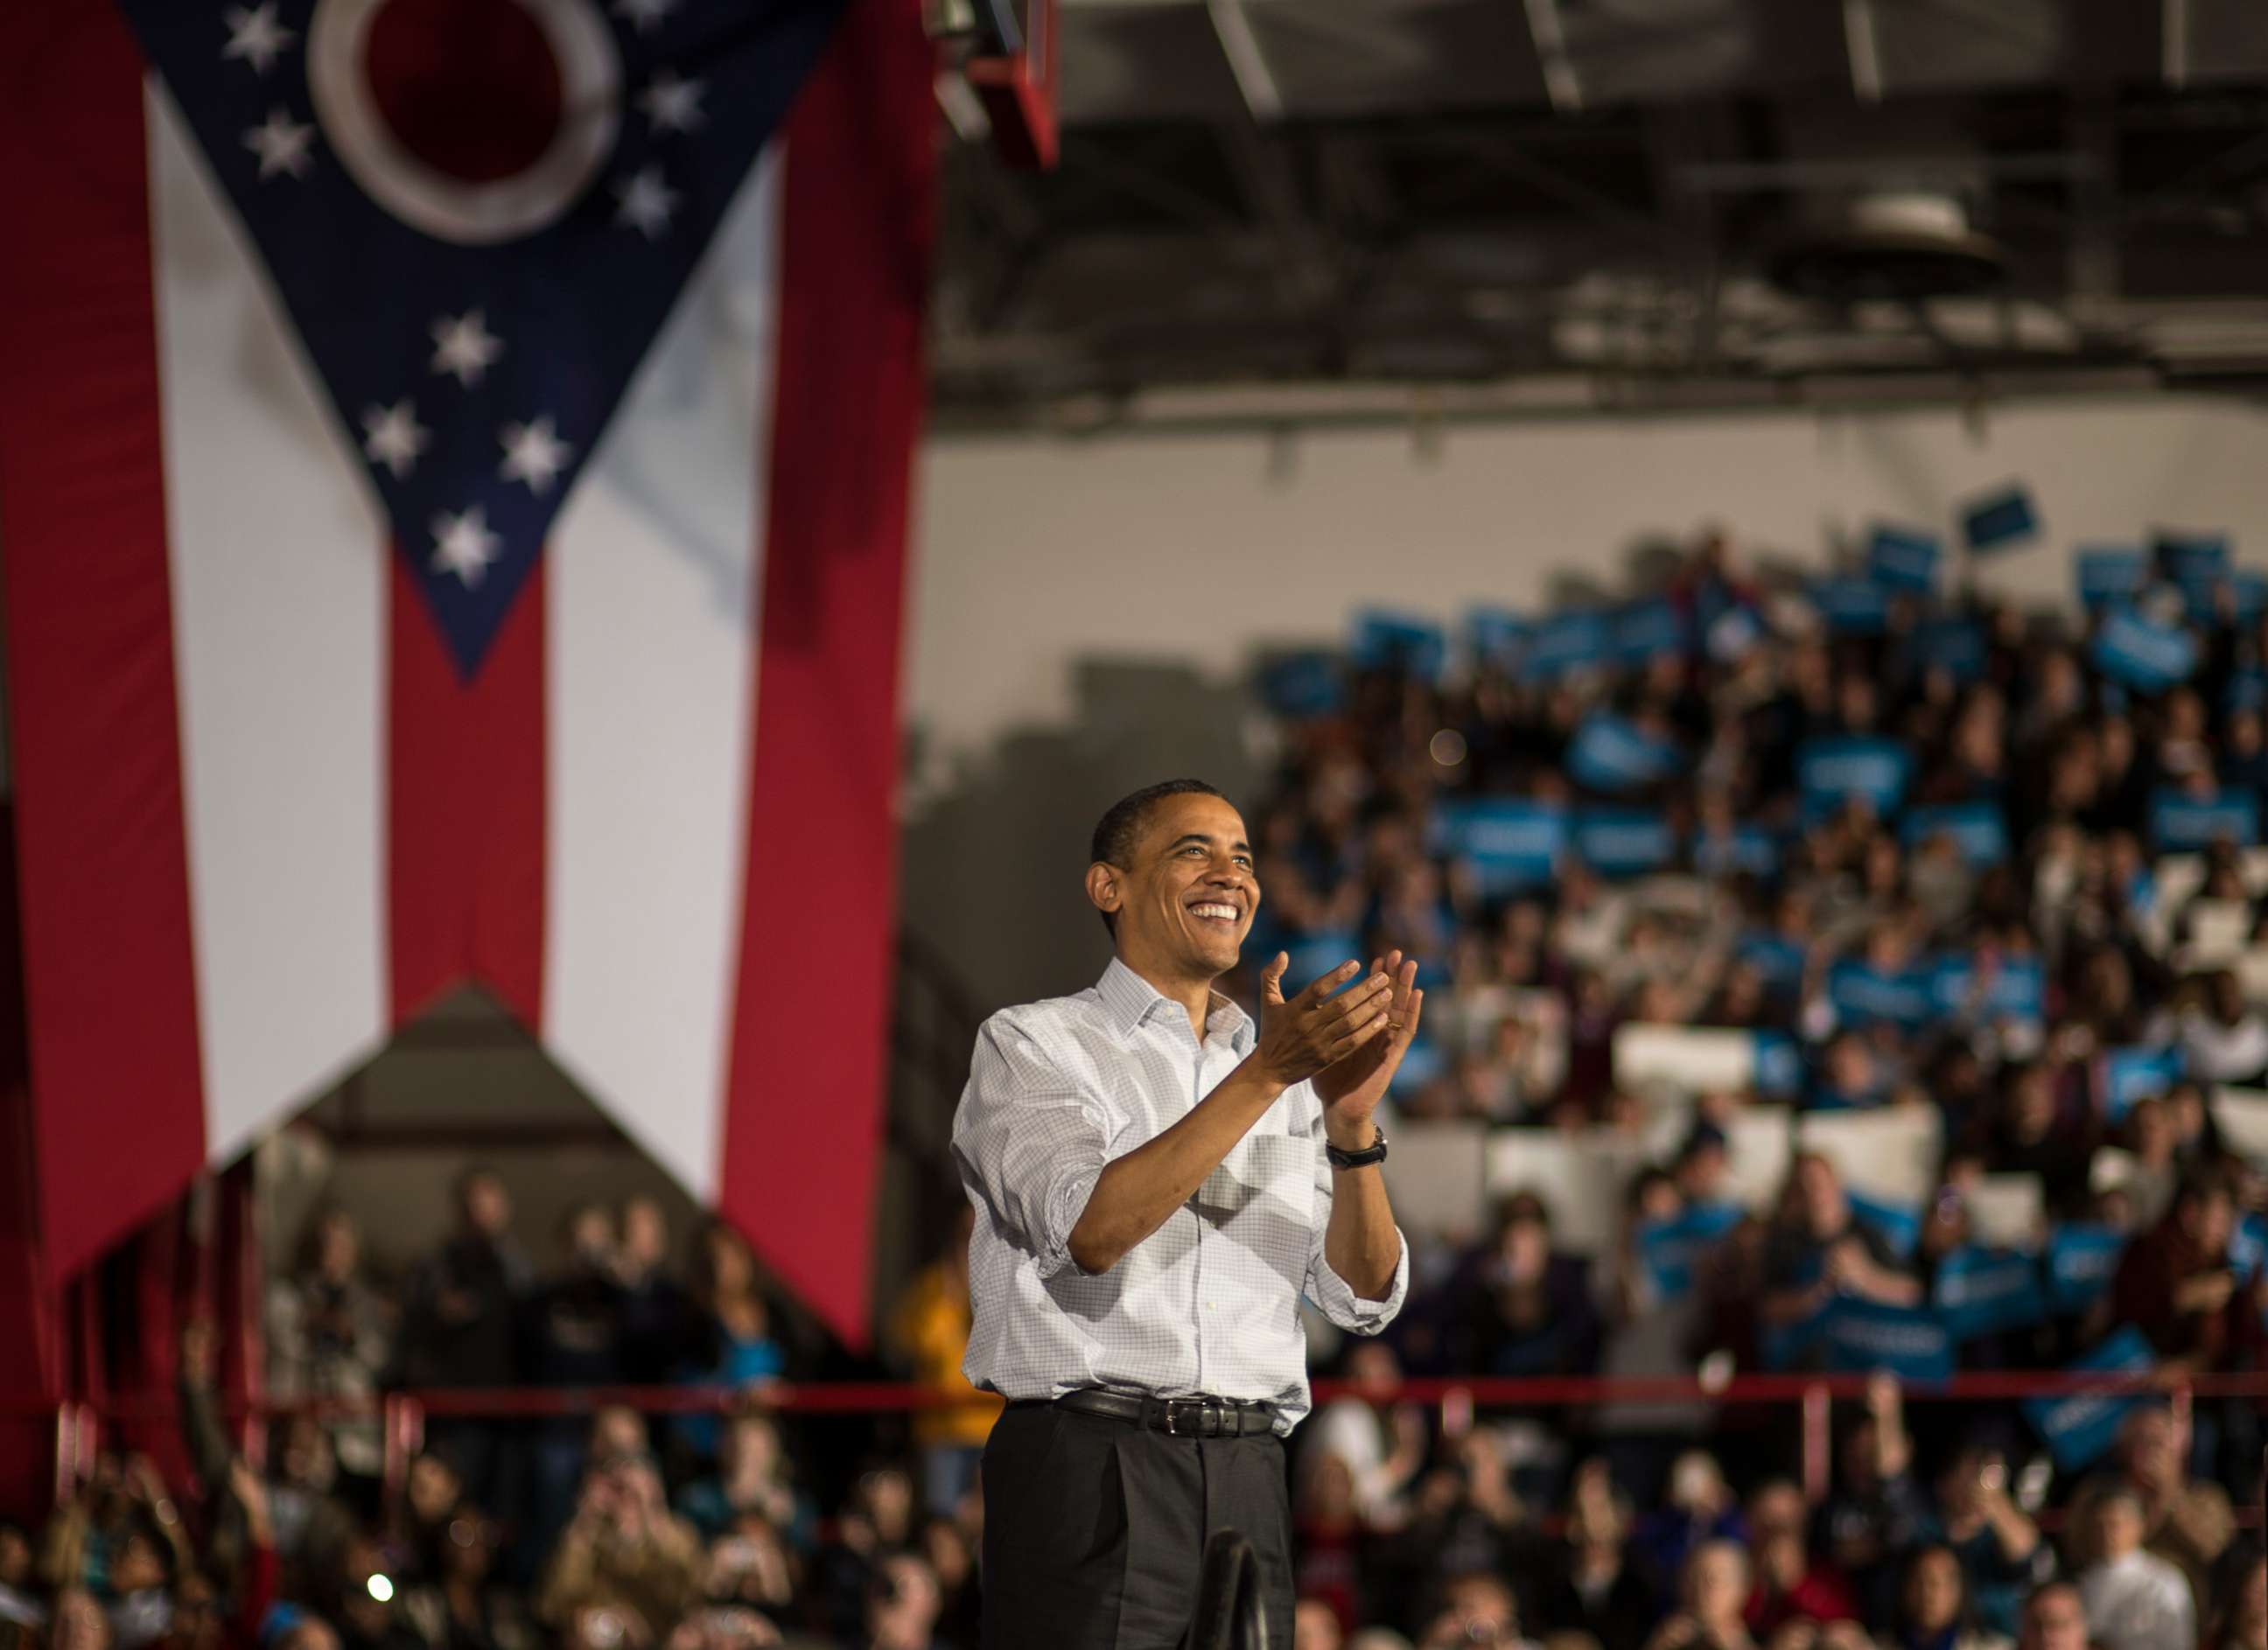 PHOTO: President Barack Obama wraps up his speech during a campaign stop in Mentor, Ohio, on Nov. 3, 2012.